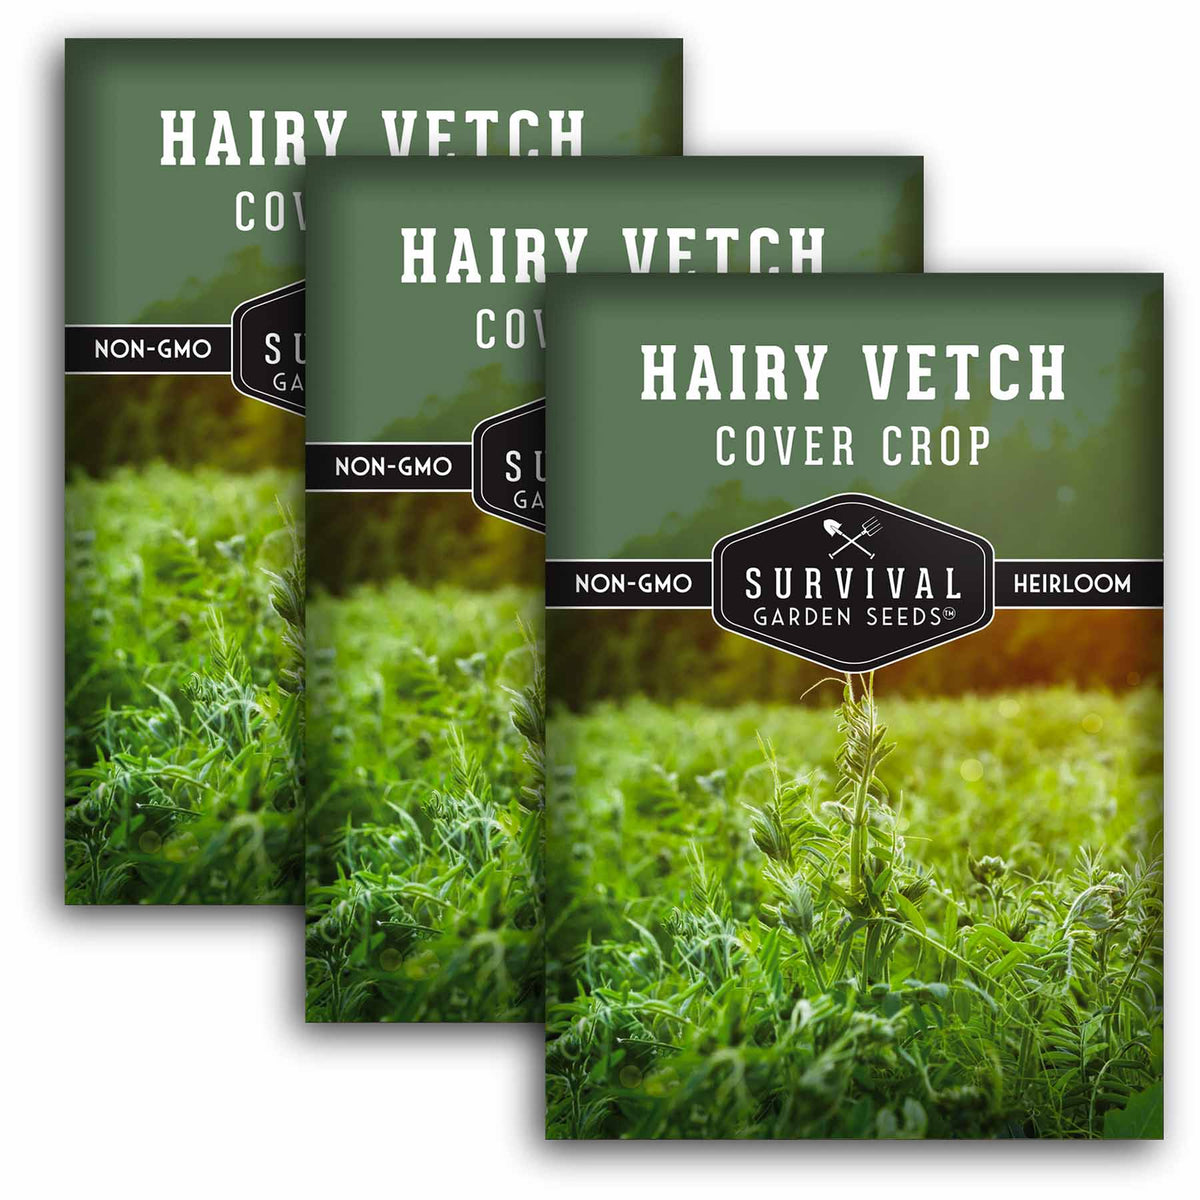 3 packet of Hairy Vetch seeds